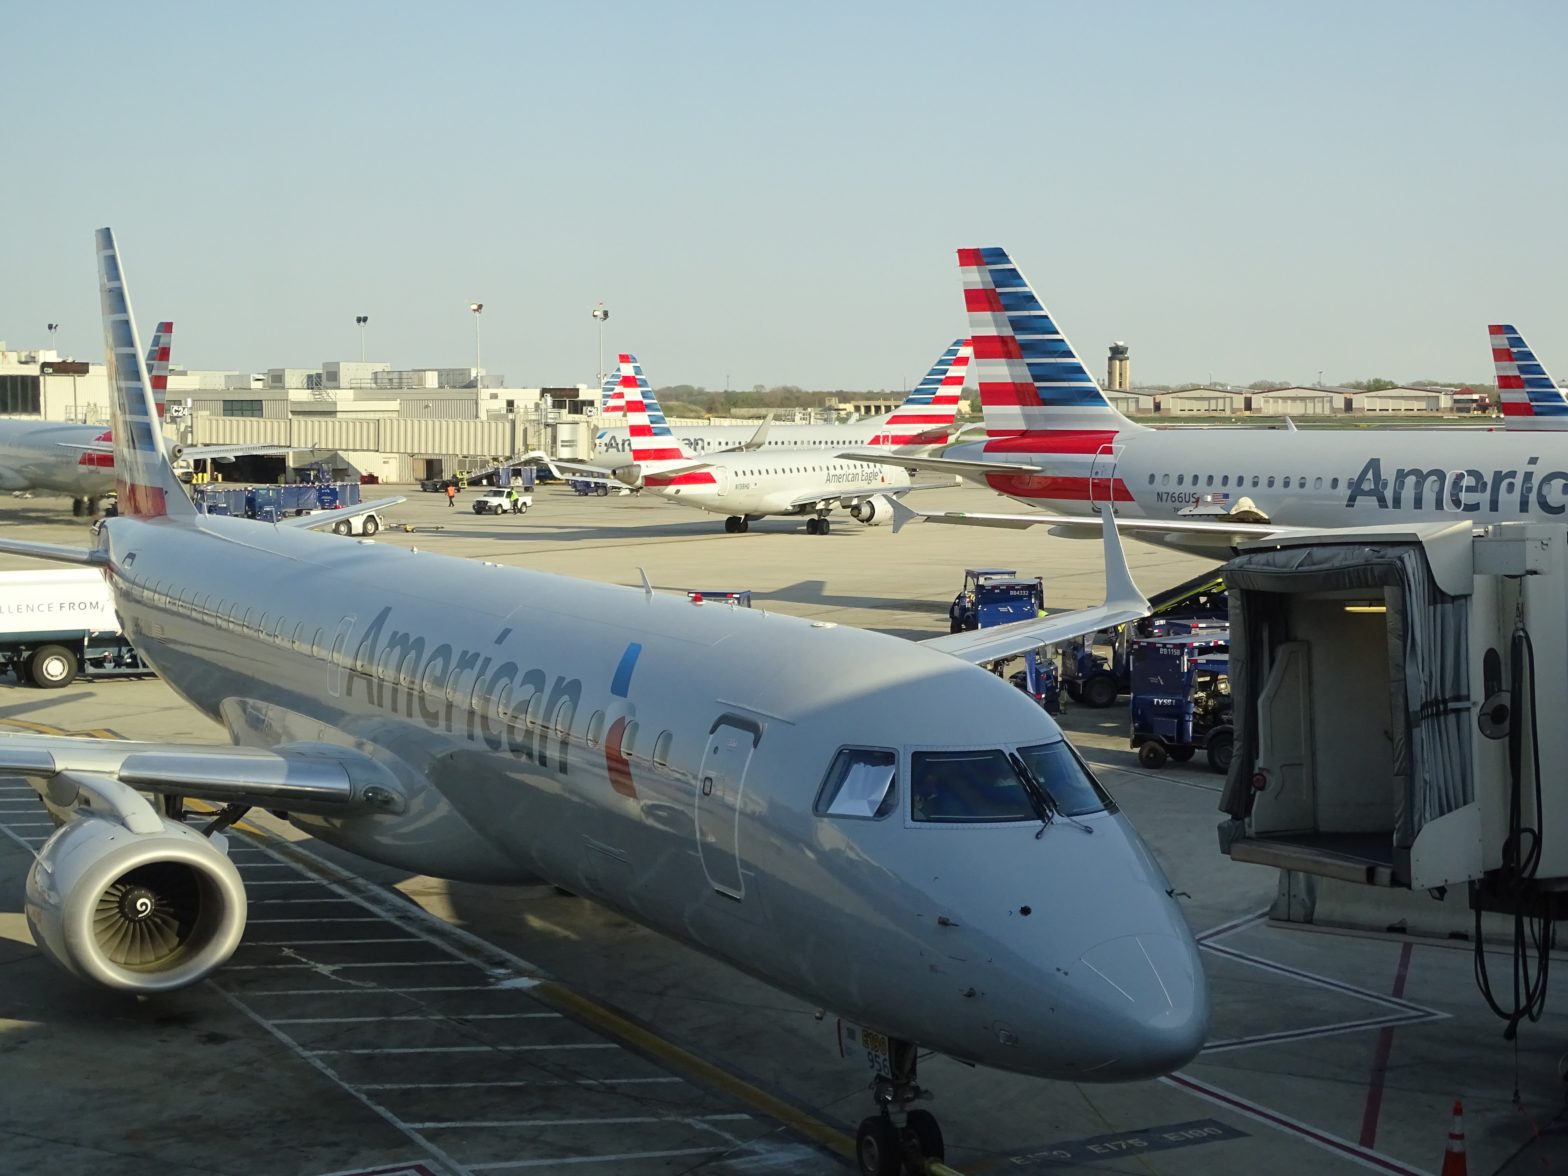 American Airlines Flight Attendants Reprimanded By Carrier For Reporting Toxic Fumes In Cabin